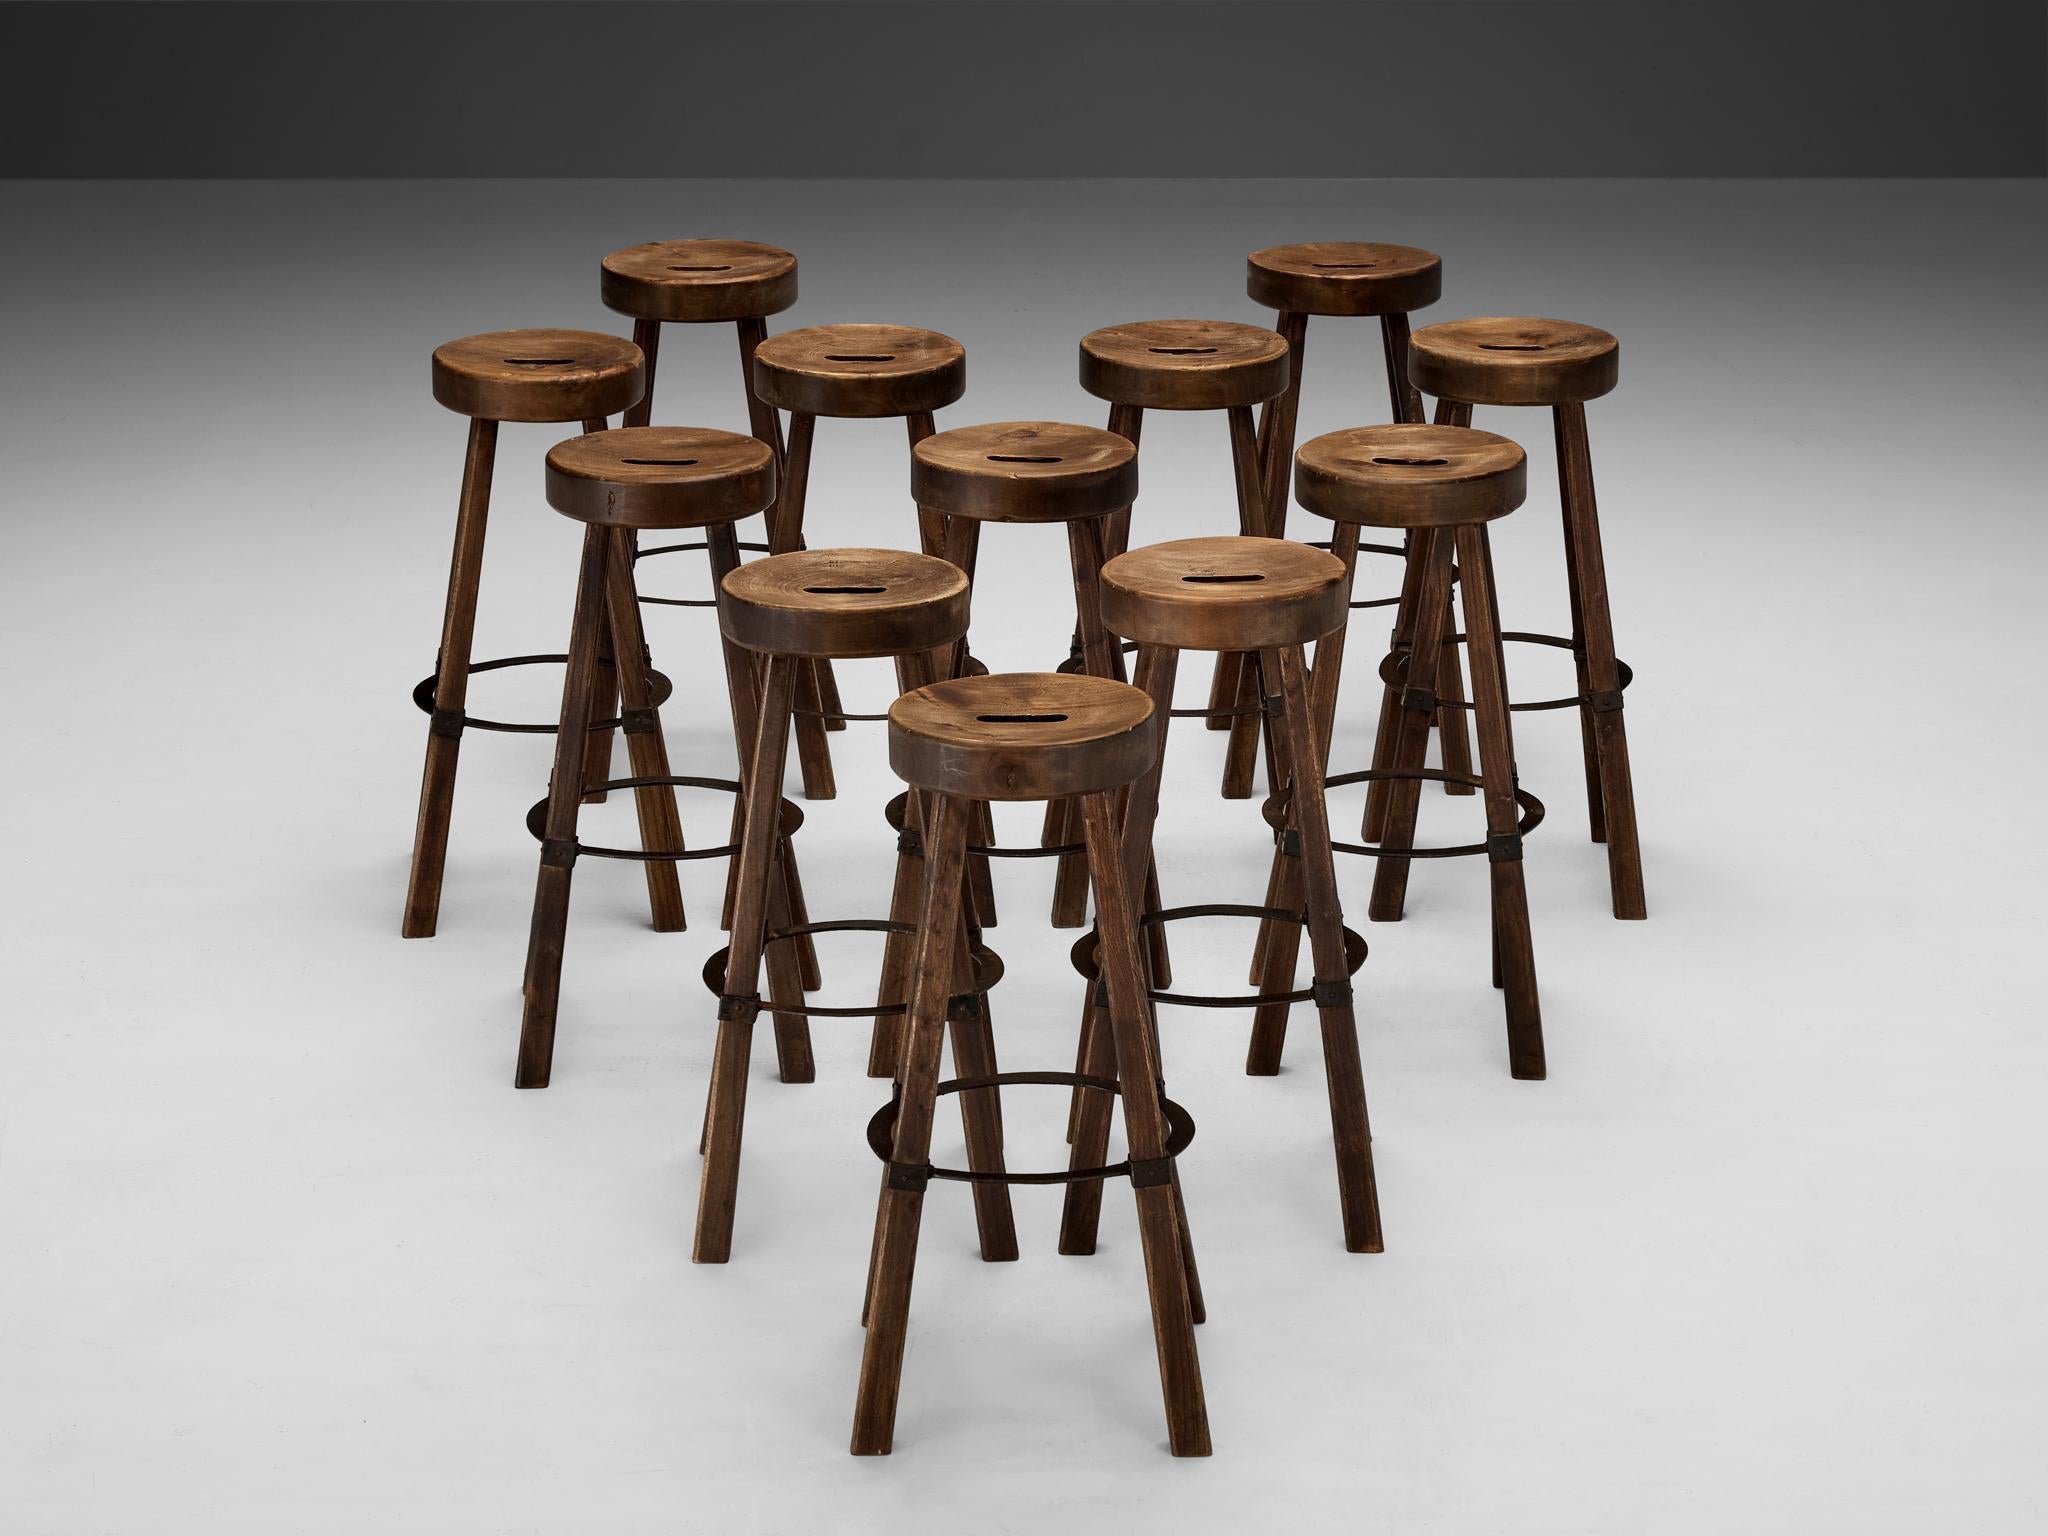 Brutalist Bar Stools in Wood and Steel Detailing